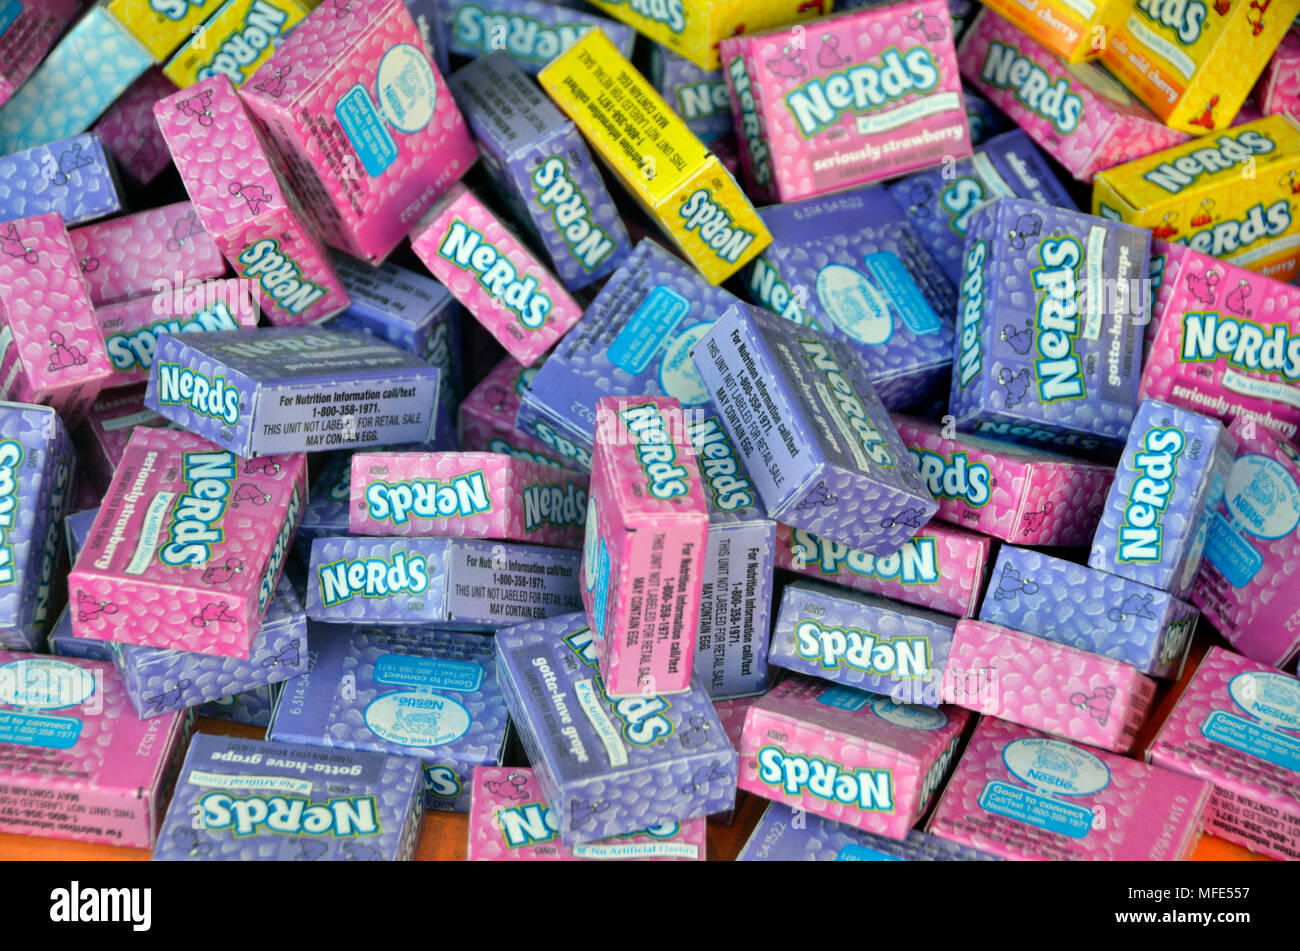 Boxes of Nerds American candy sweets Stock Photo